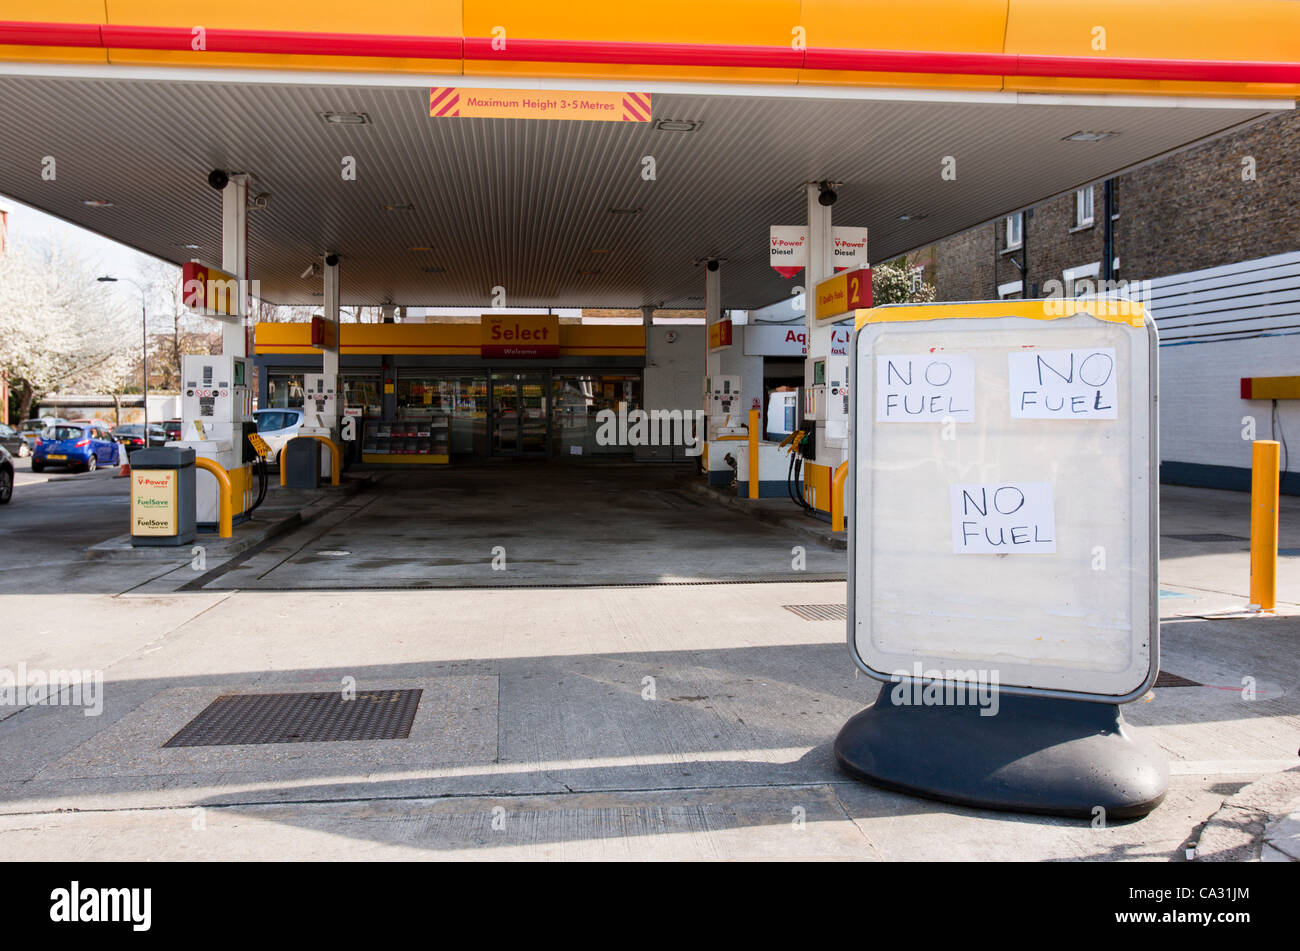 London, UK. March 29, 2012 - A hand written sign reads 'no fuel' at the front of the Shell petrol station on the Fulham road in West London. The fuel shortage seems to be a direct result of panic buying from the general public after the threat of strike action by fuel tanker drivers. Stock Photo